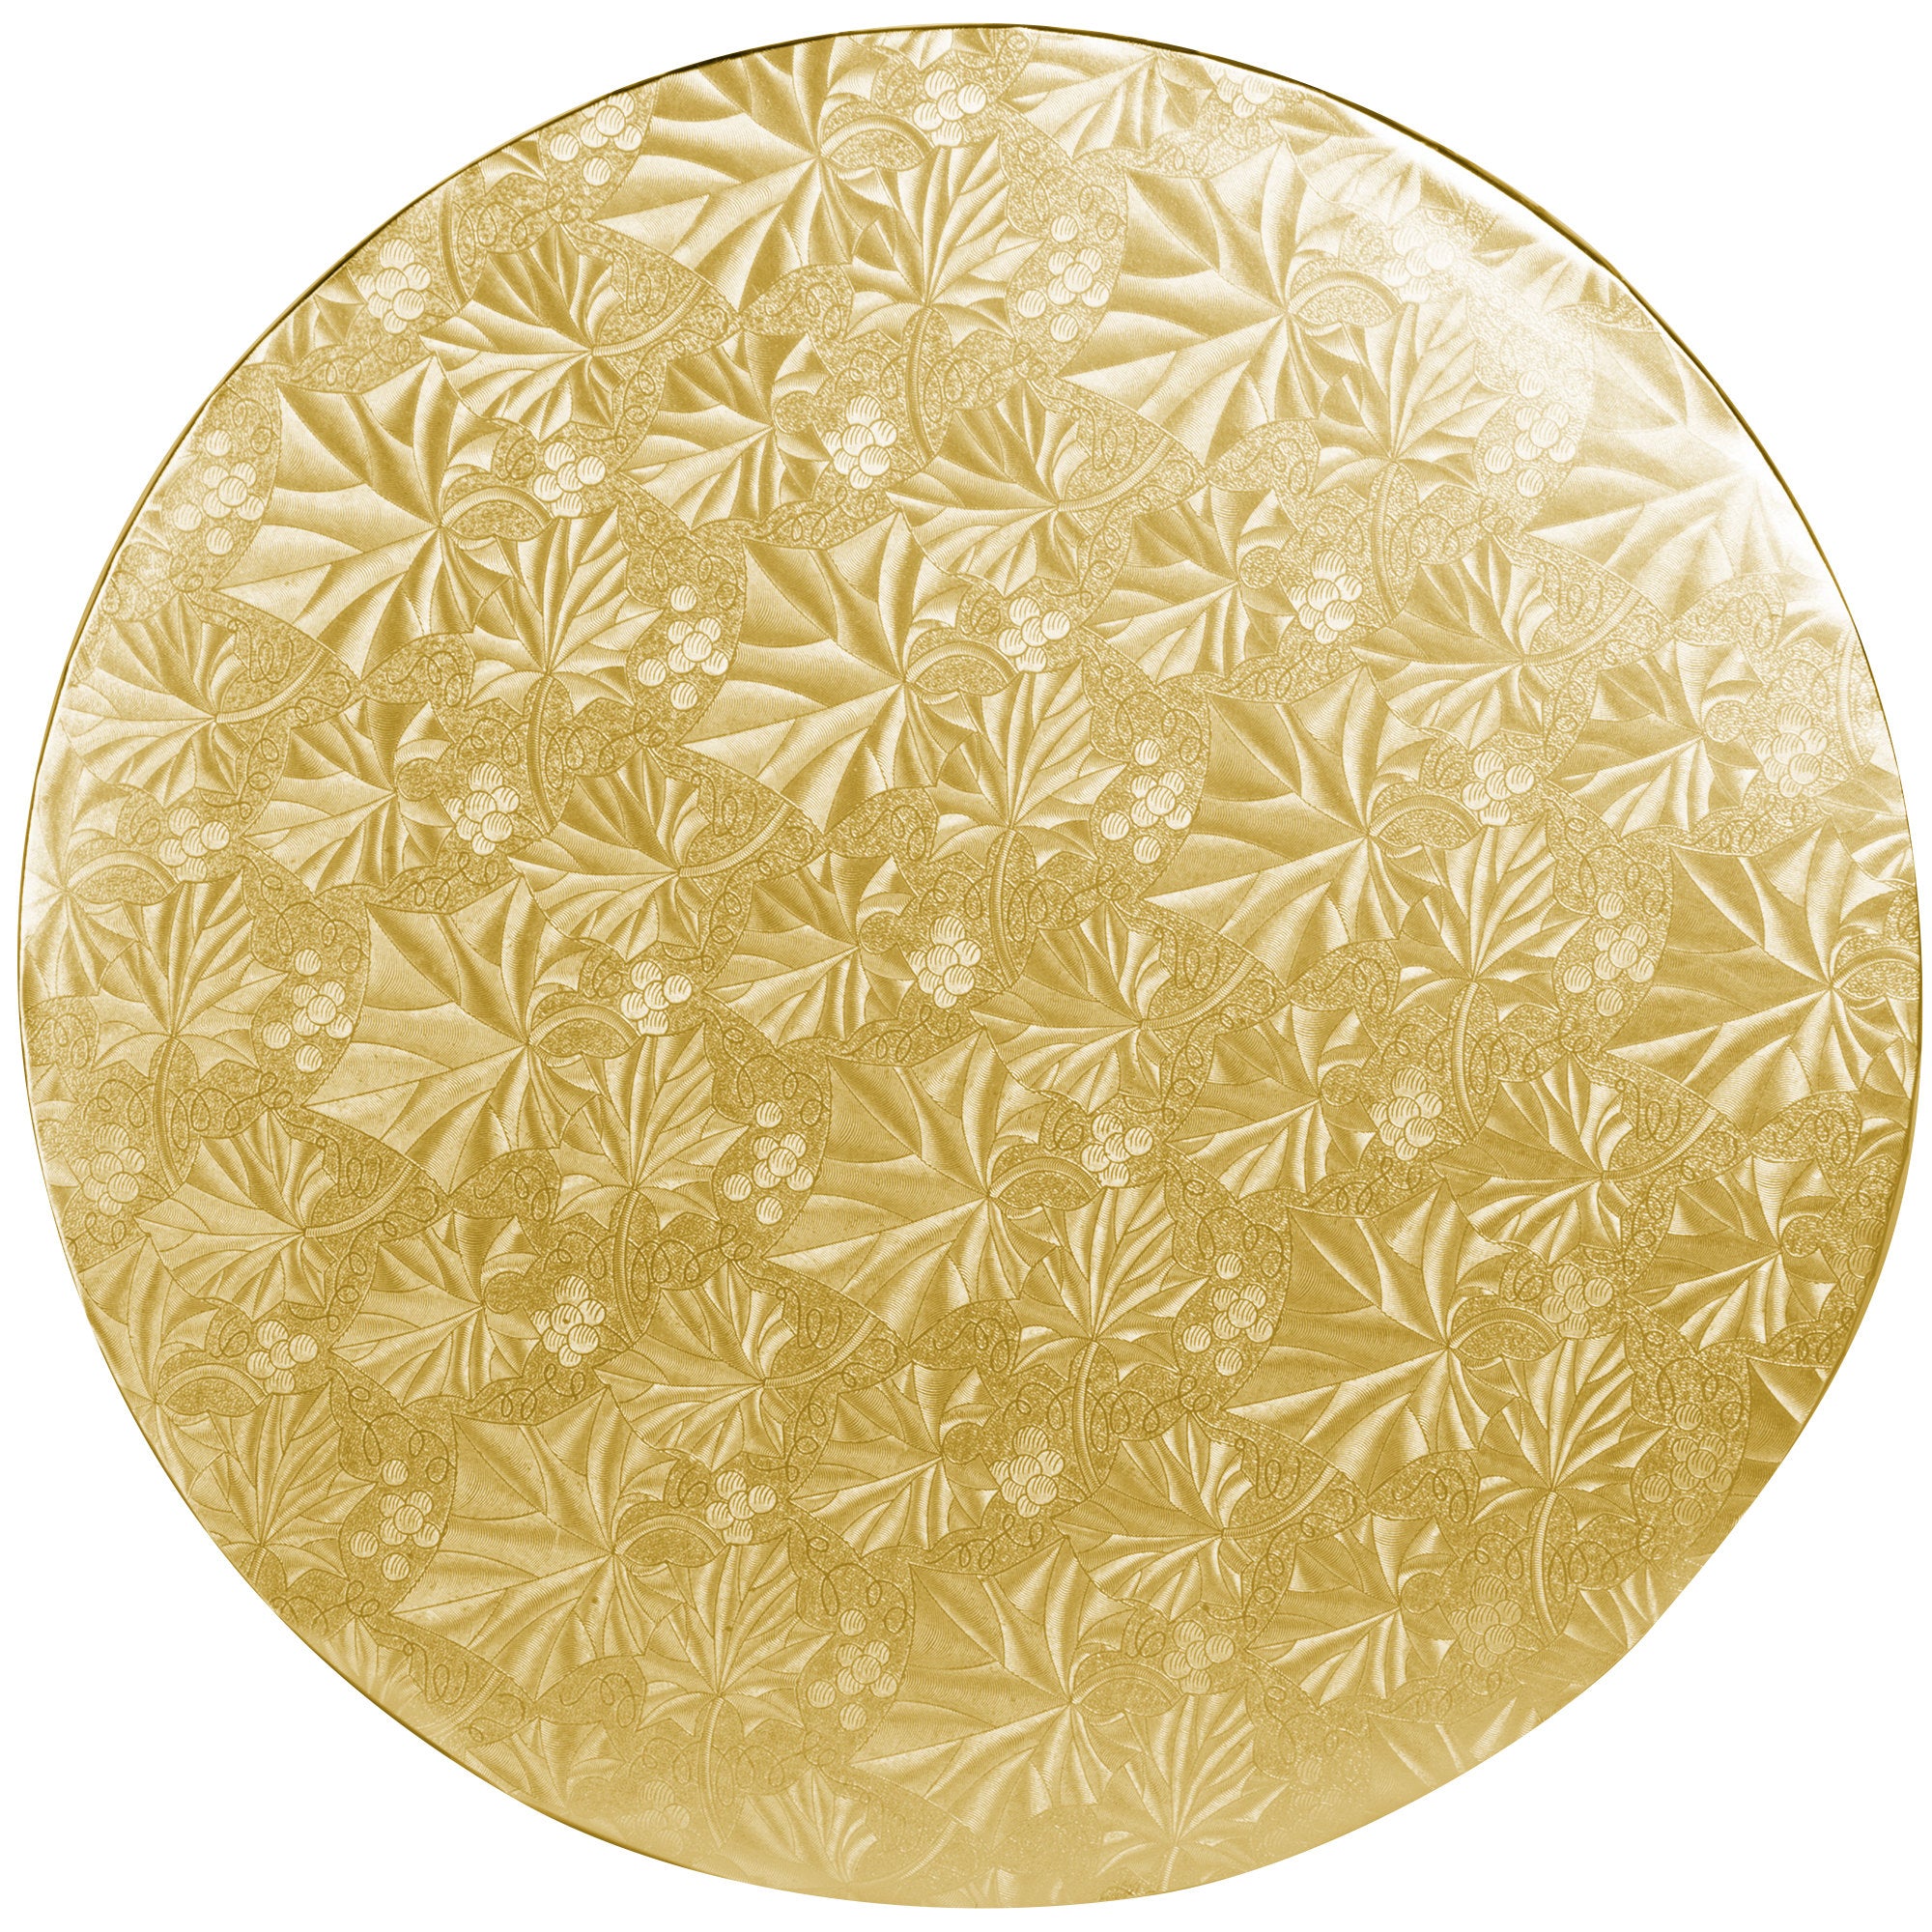 image of 14 inch round gold cake drum that is 1/2 inch thick